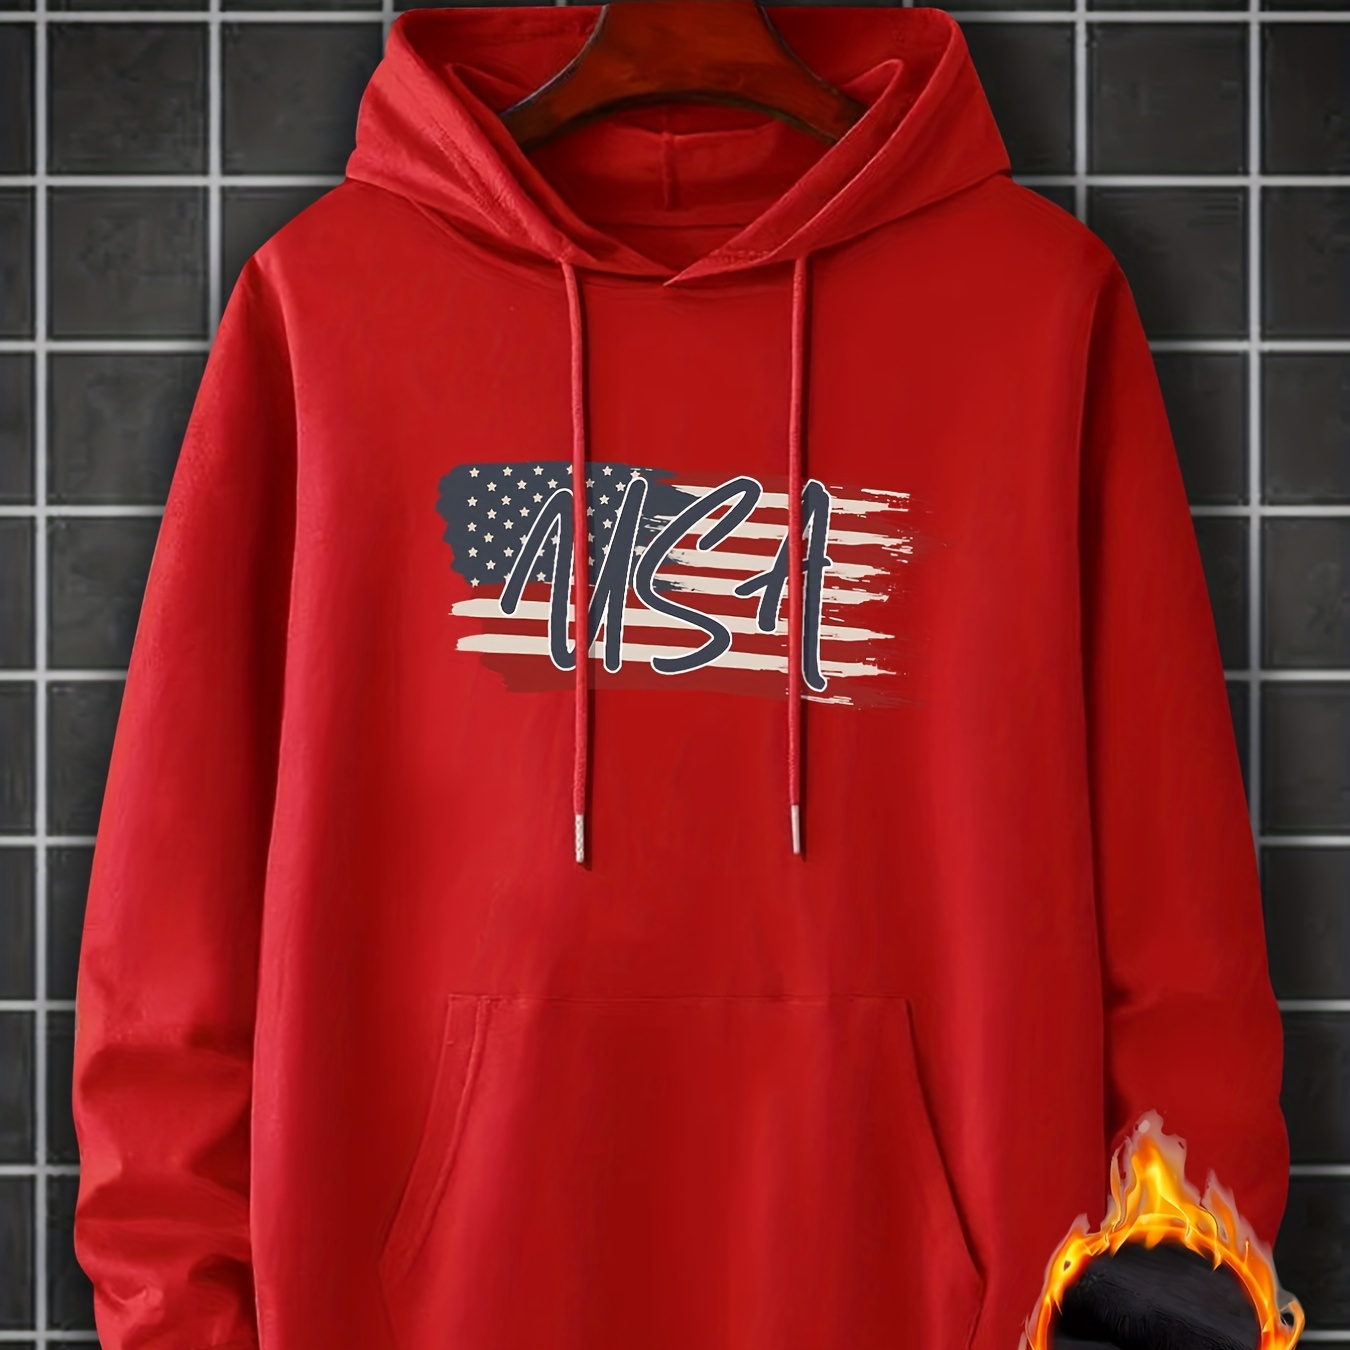 

Men's Hooded Sweatshirt, "usa" & Flag Graphic Print Long Sleeve Sweatshirt, Oversized Sports Tops For Big & Tall Guys, Perfect For Spring/autumn, Plus Size